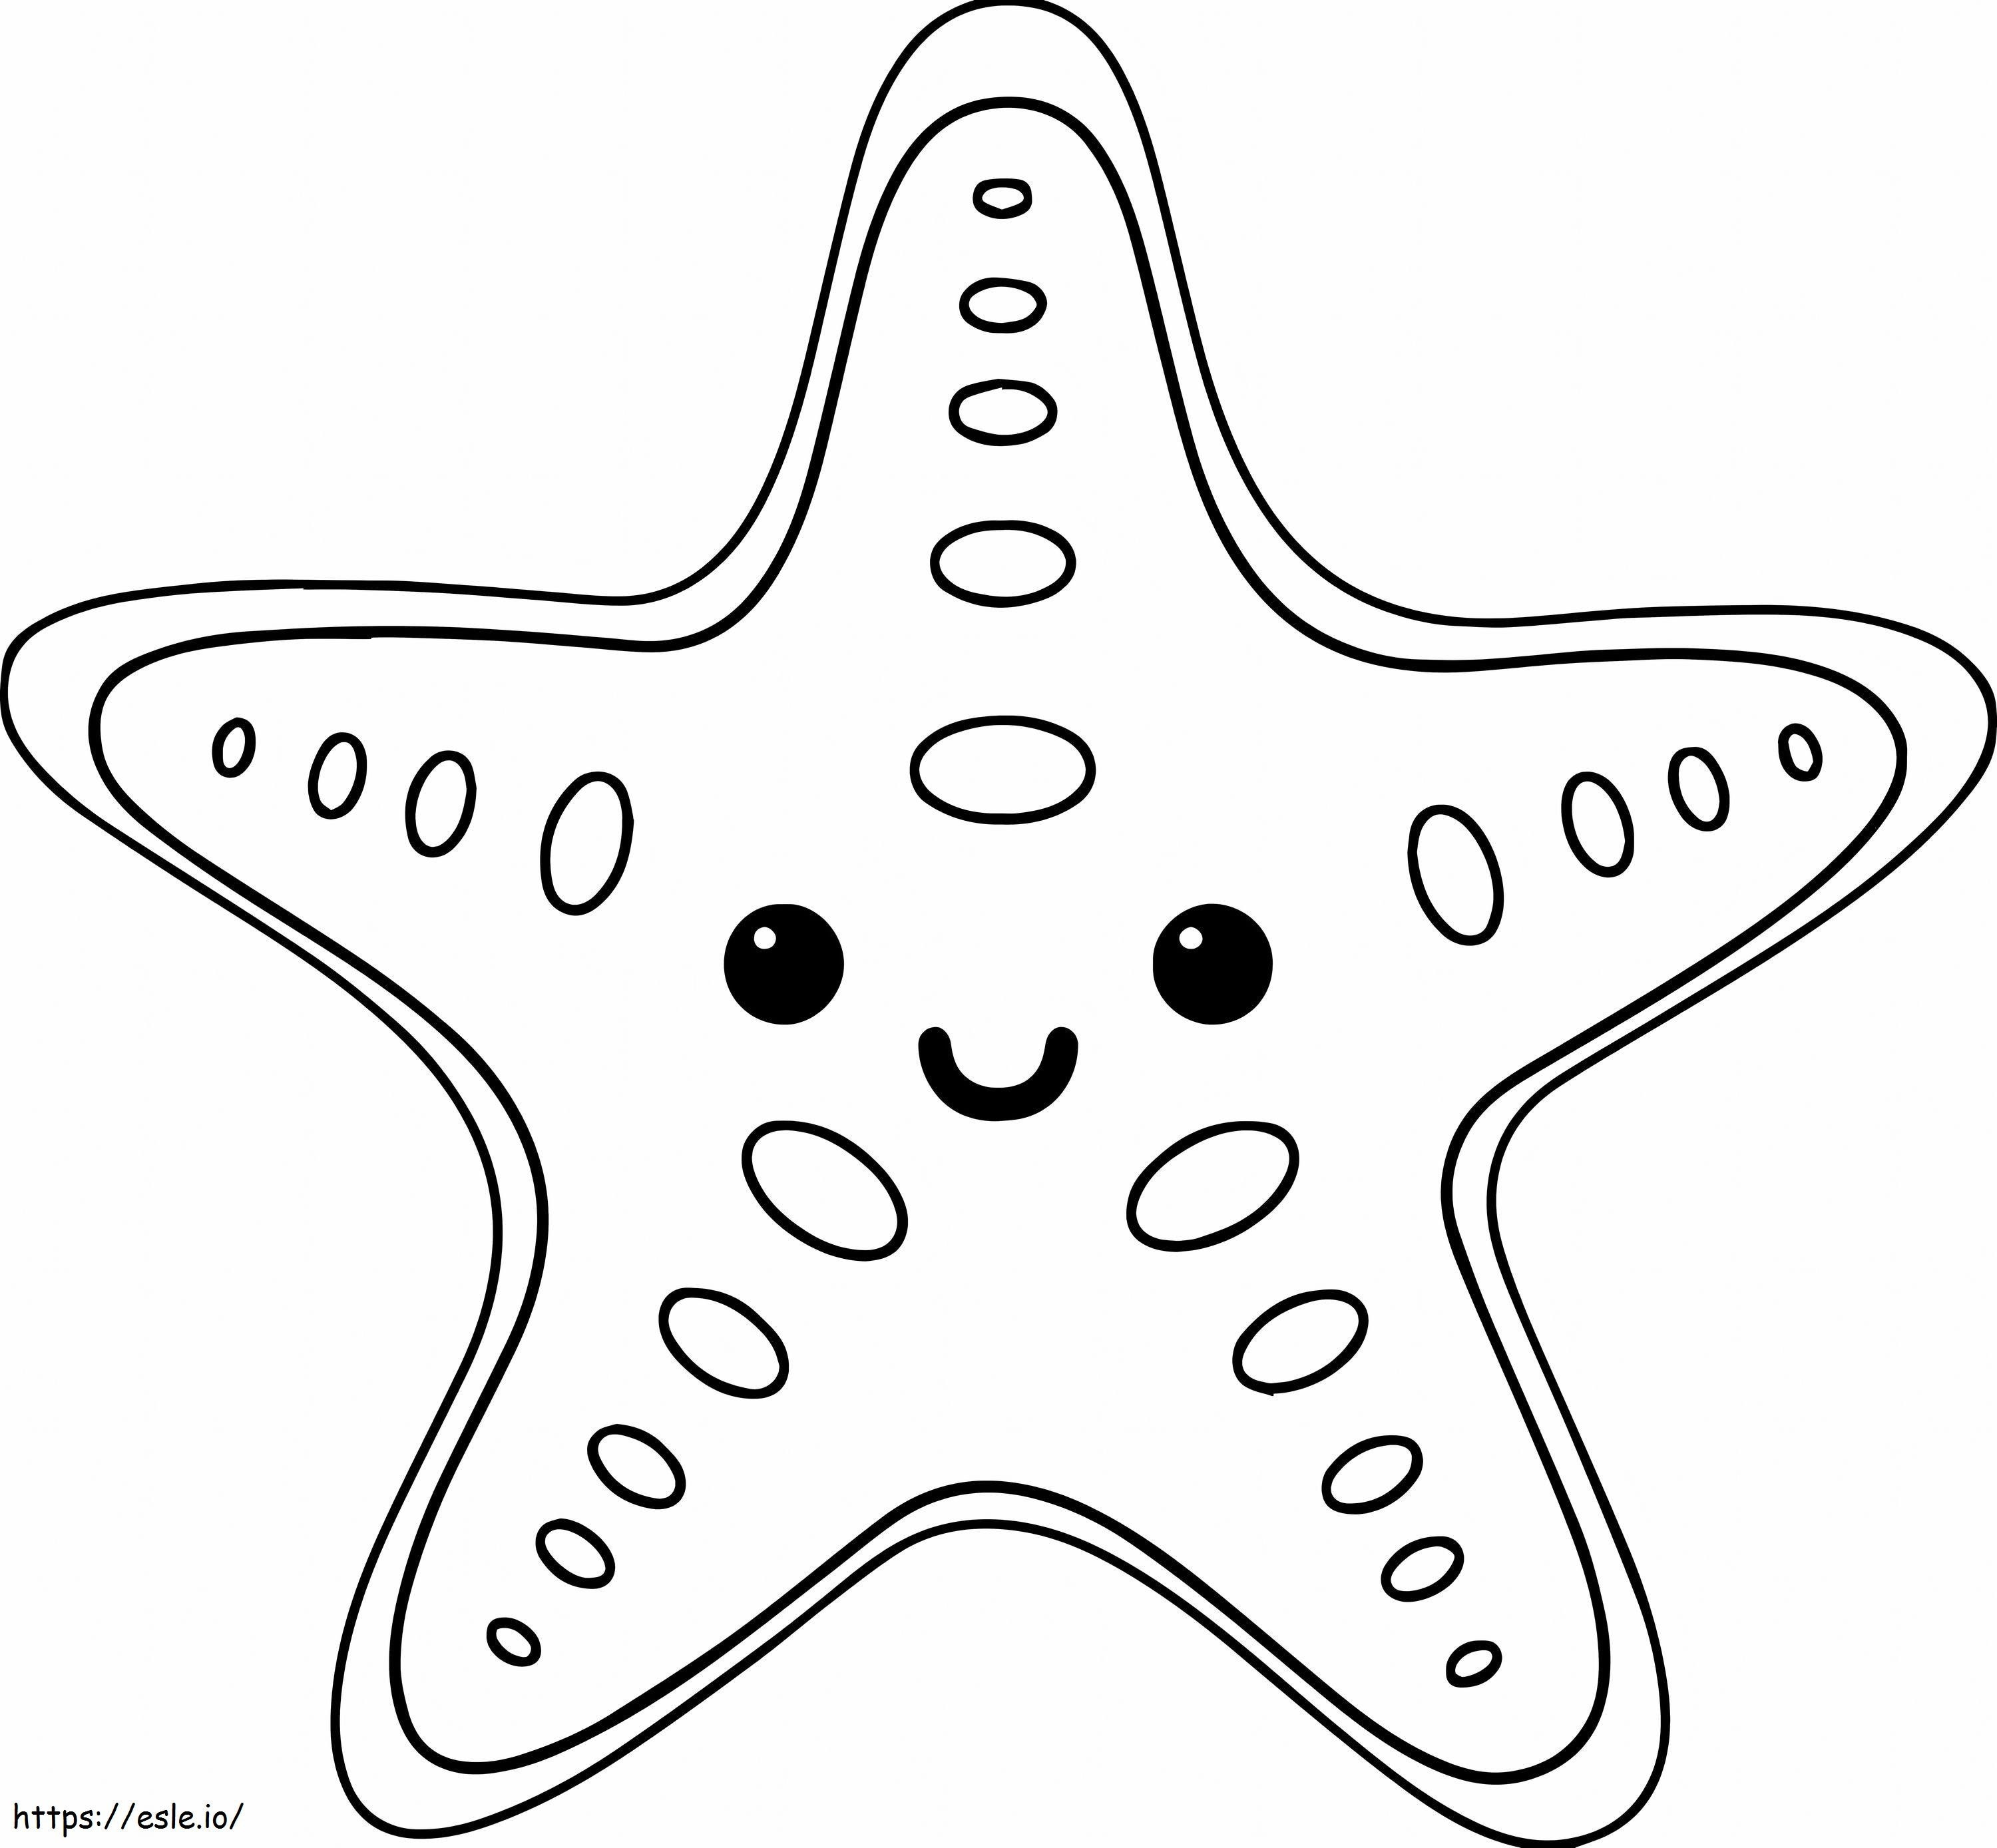 Smiling Starfish coloring page